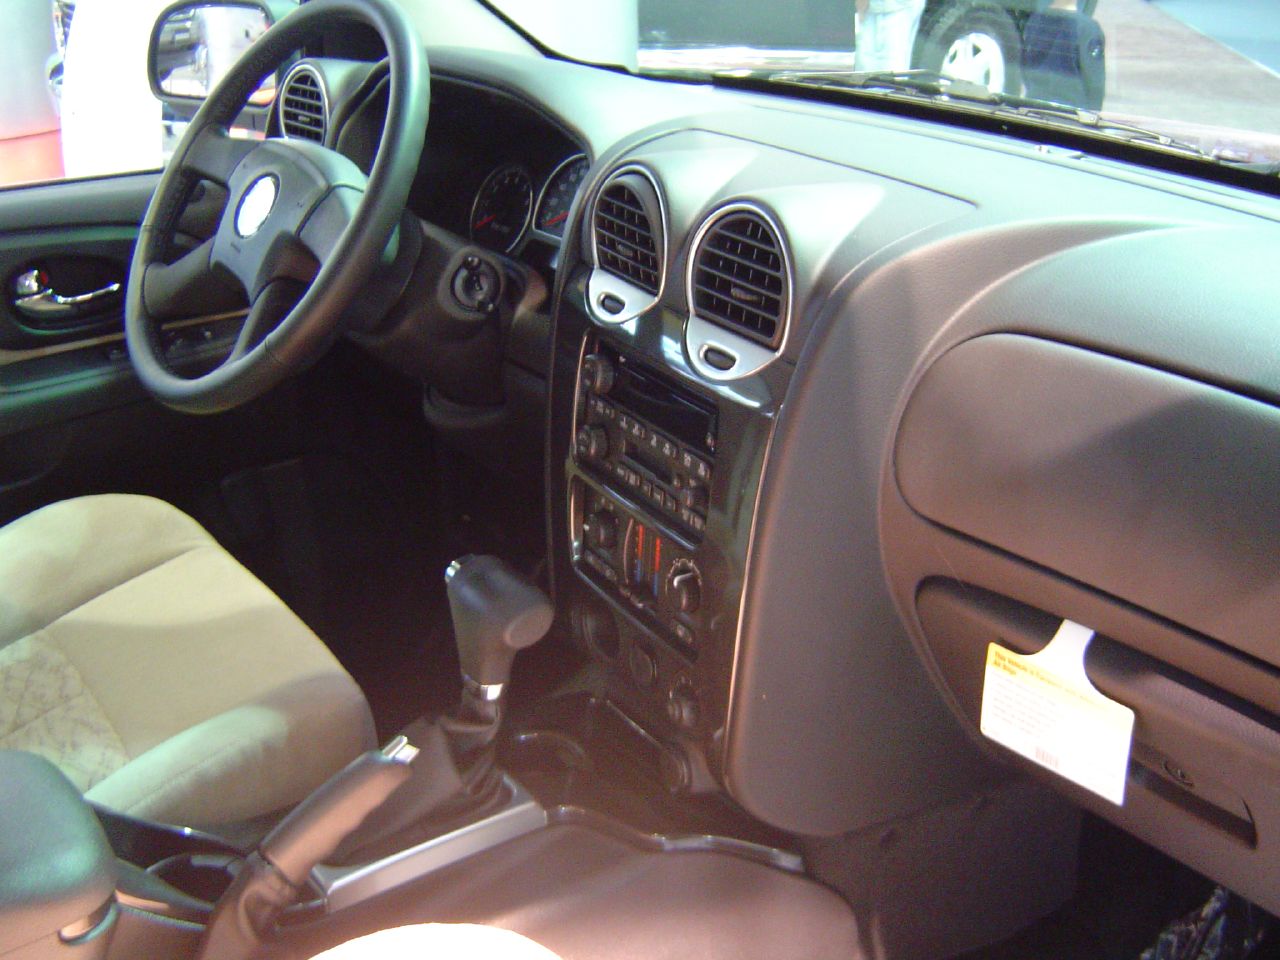 an image of the interior of a car